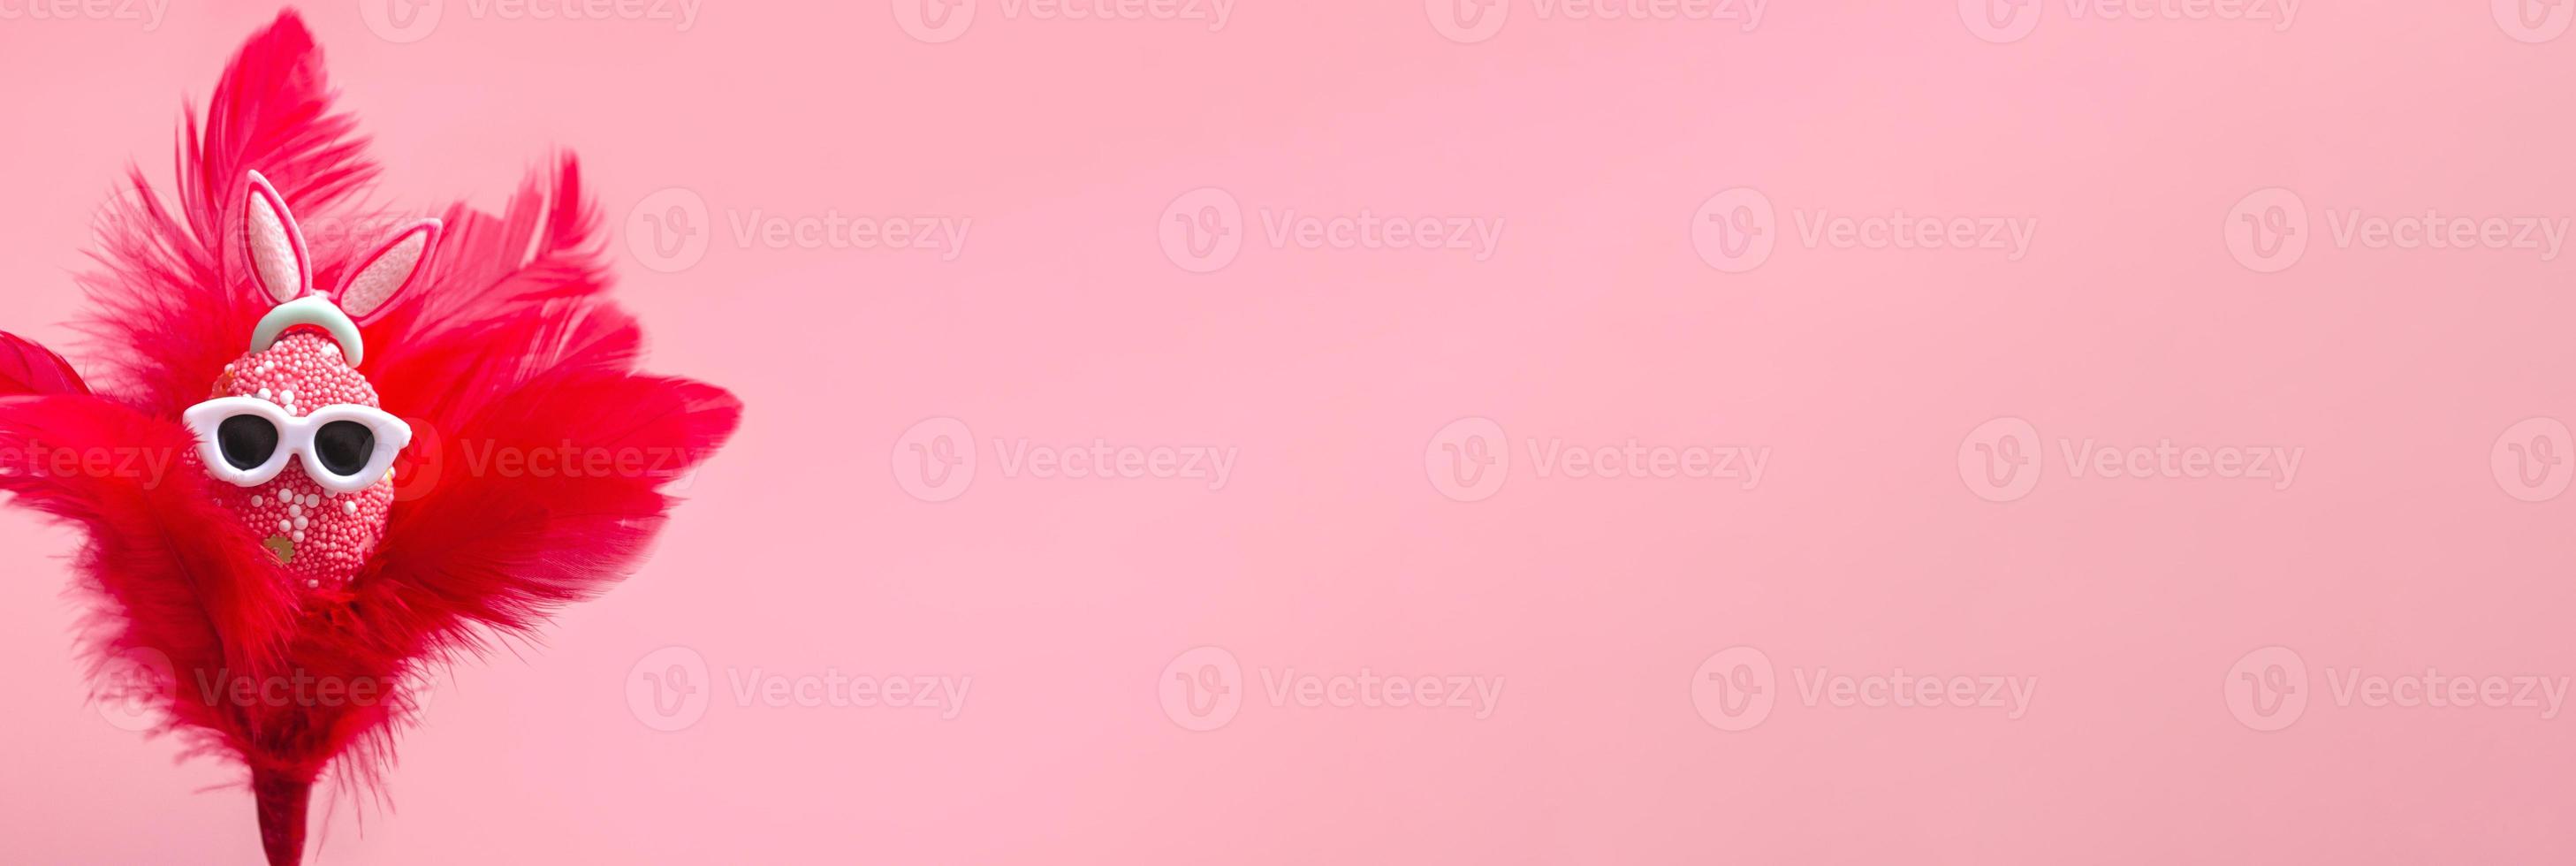 Colorful egg with rabbit ears in sunglasses, in red feathers on a pink background. Happy Easter promotion banner, mockup template. closeup photo